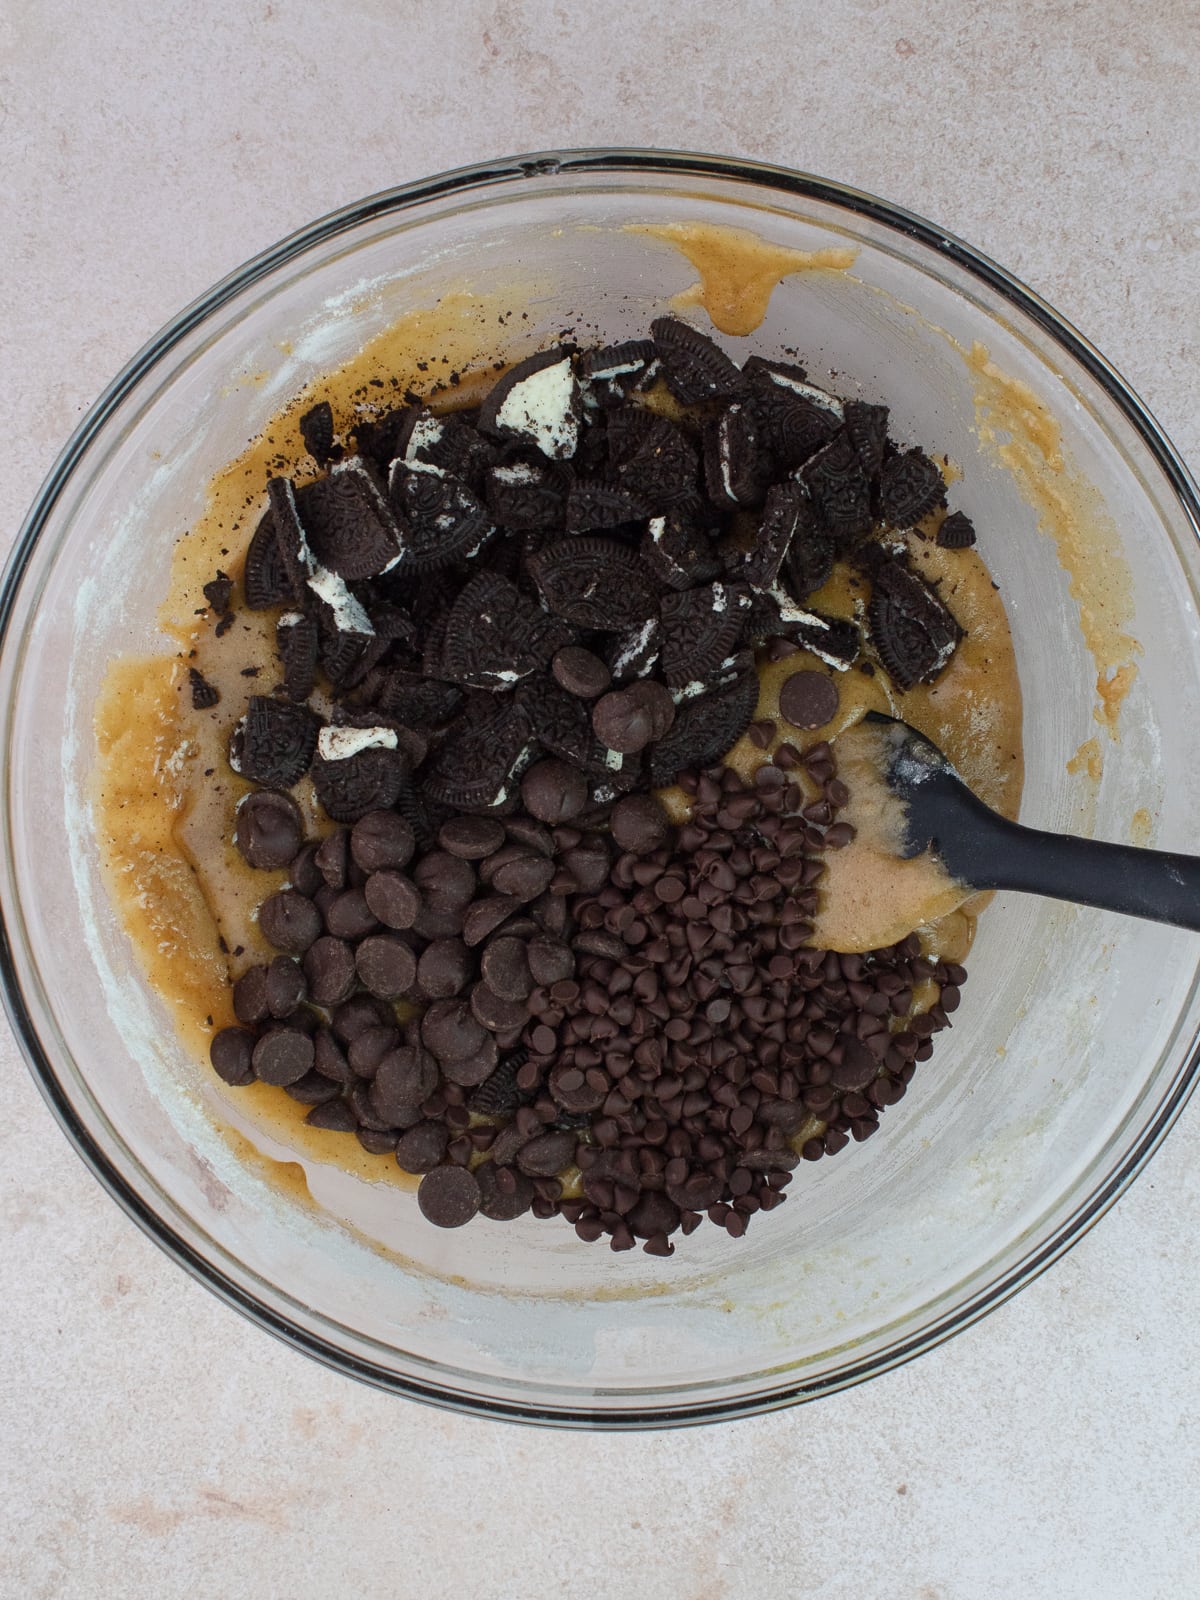 Chopped Oreo cookies, chocolate chips and mini chocolate chip are added to batter